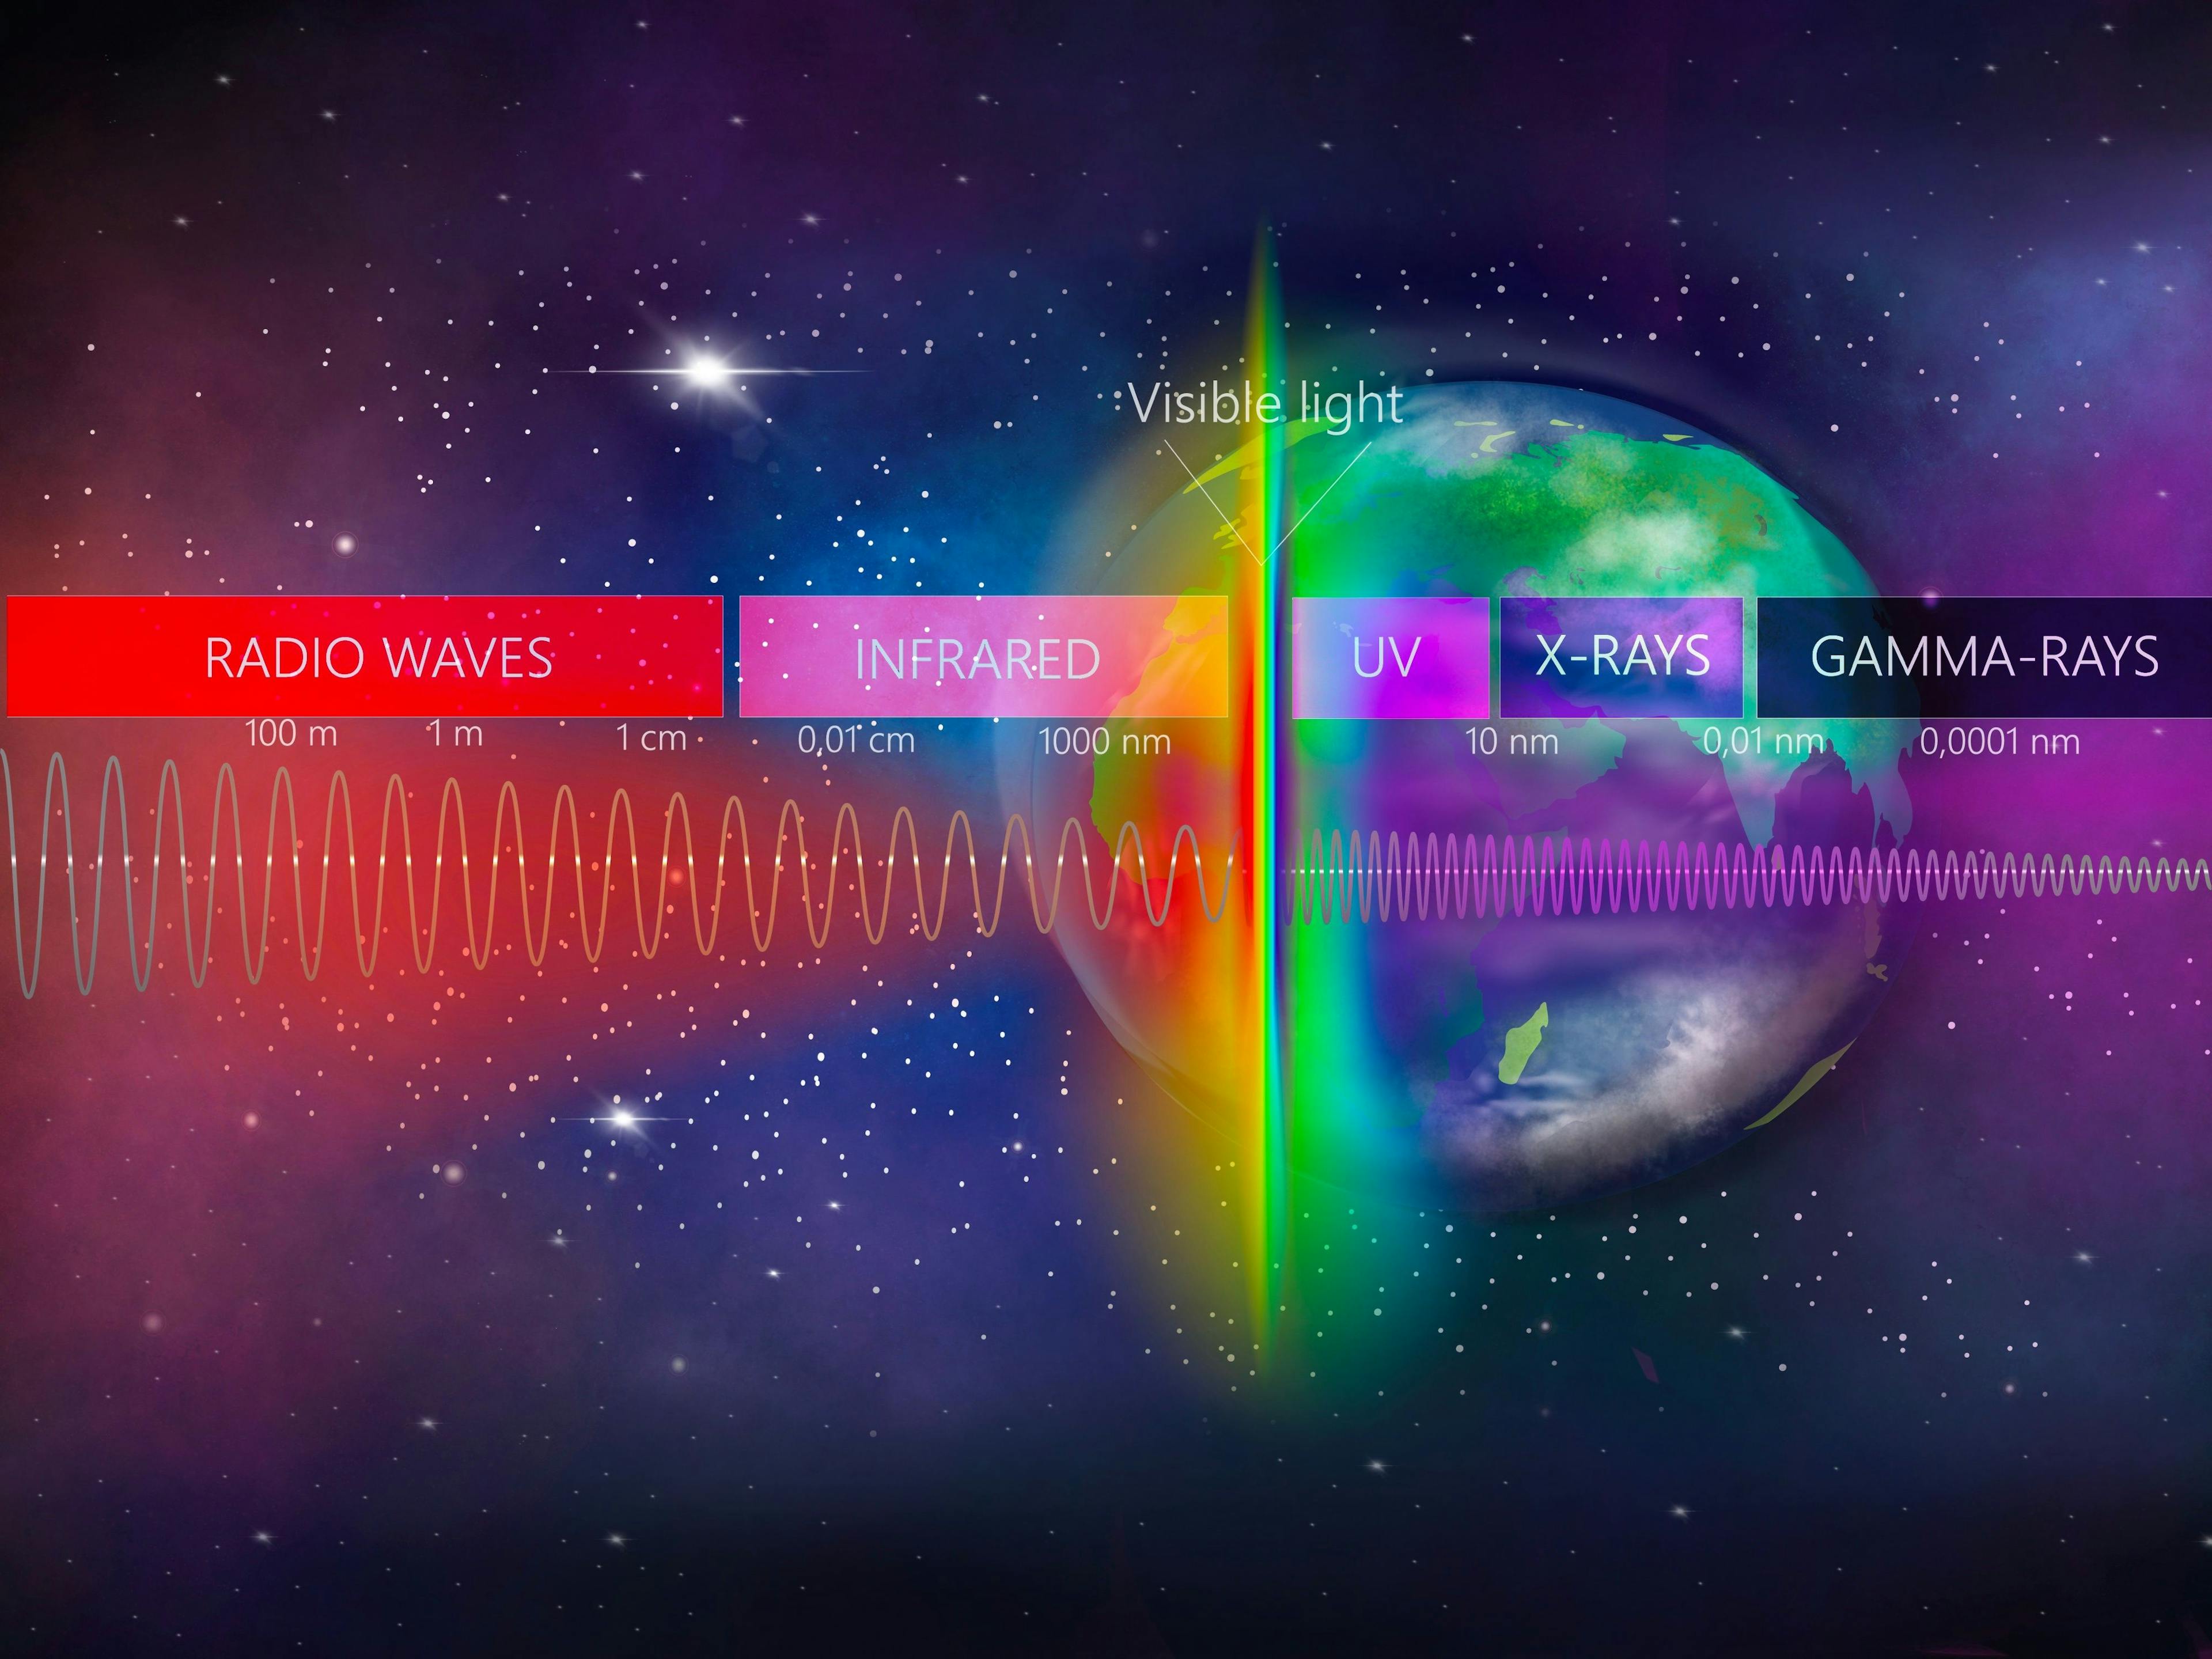 The light spectrum of waves includes infrared rays, visible light, gamma rays, ultraviolet rays and X-rays on the Earth background | Image Credit: © Helen - stock.adobe.com